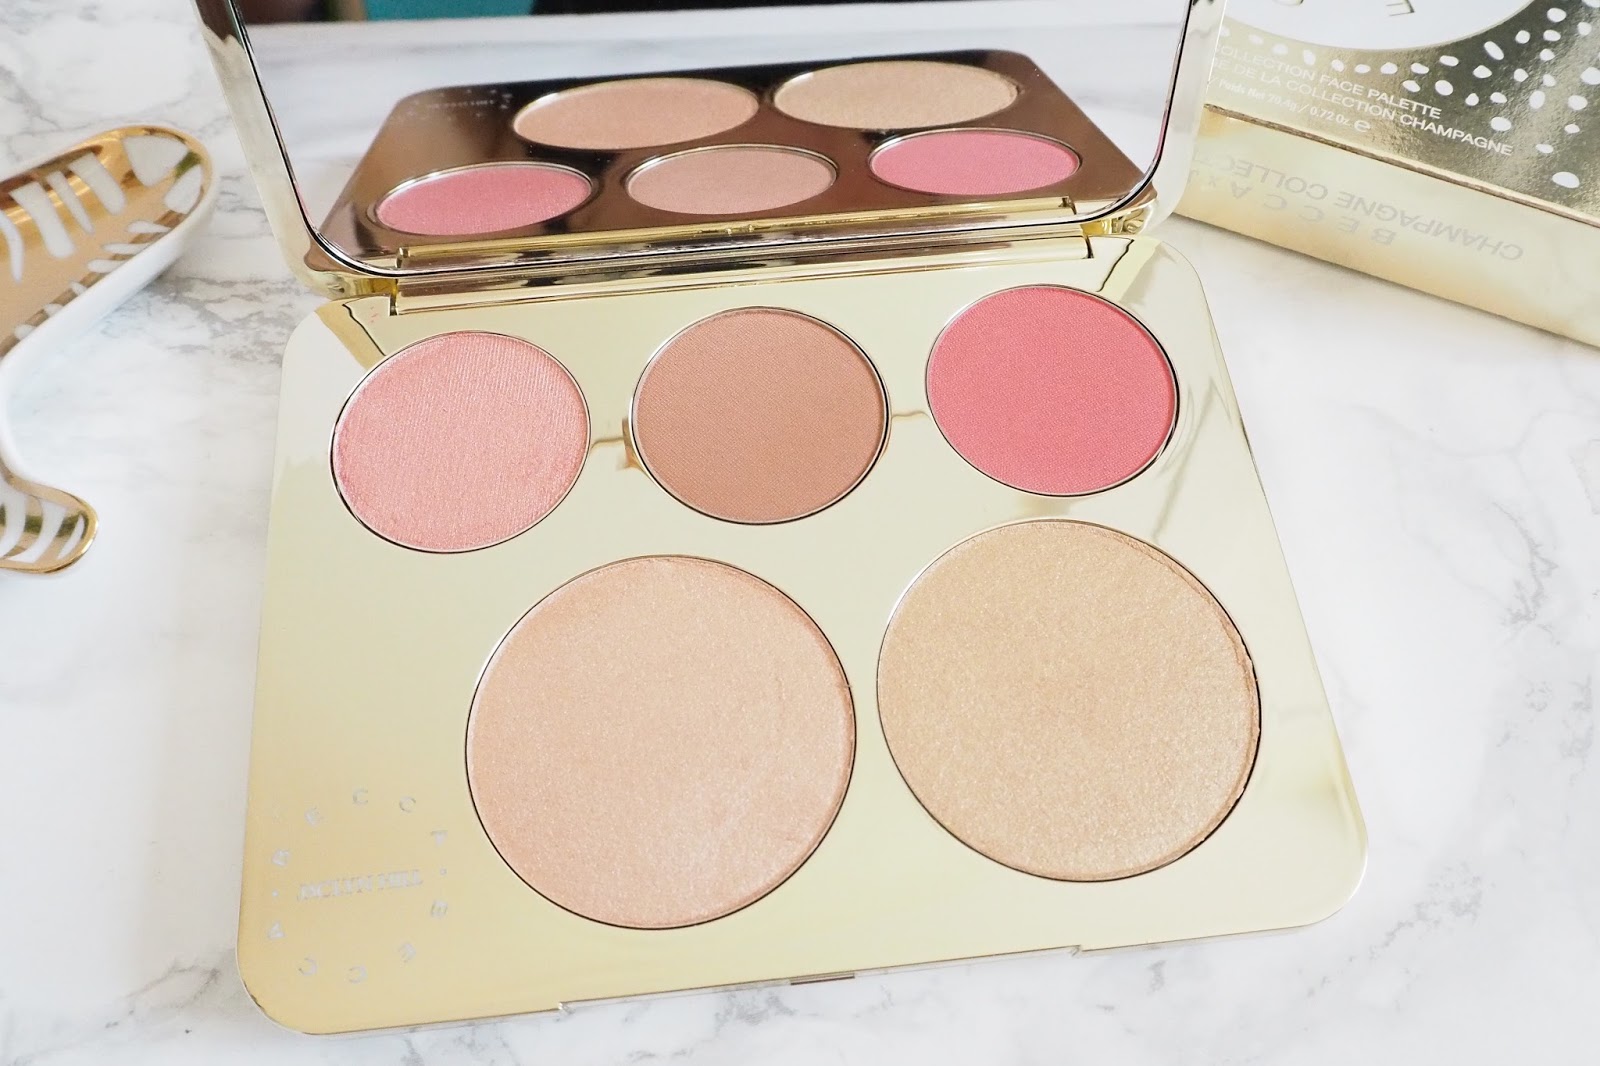 Peck nyhed Vulkan Becca x Jaclyn Hill Champagne Collection Face Palette Review & Swatches - a  little pop of coral.